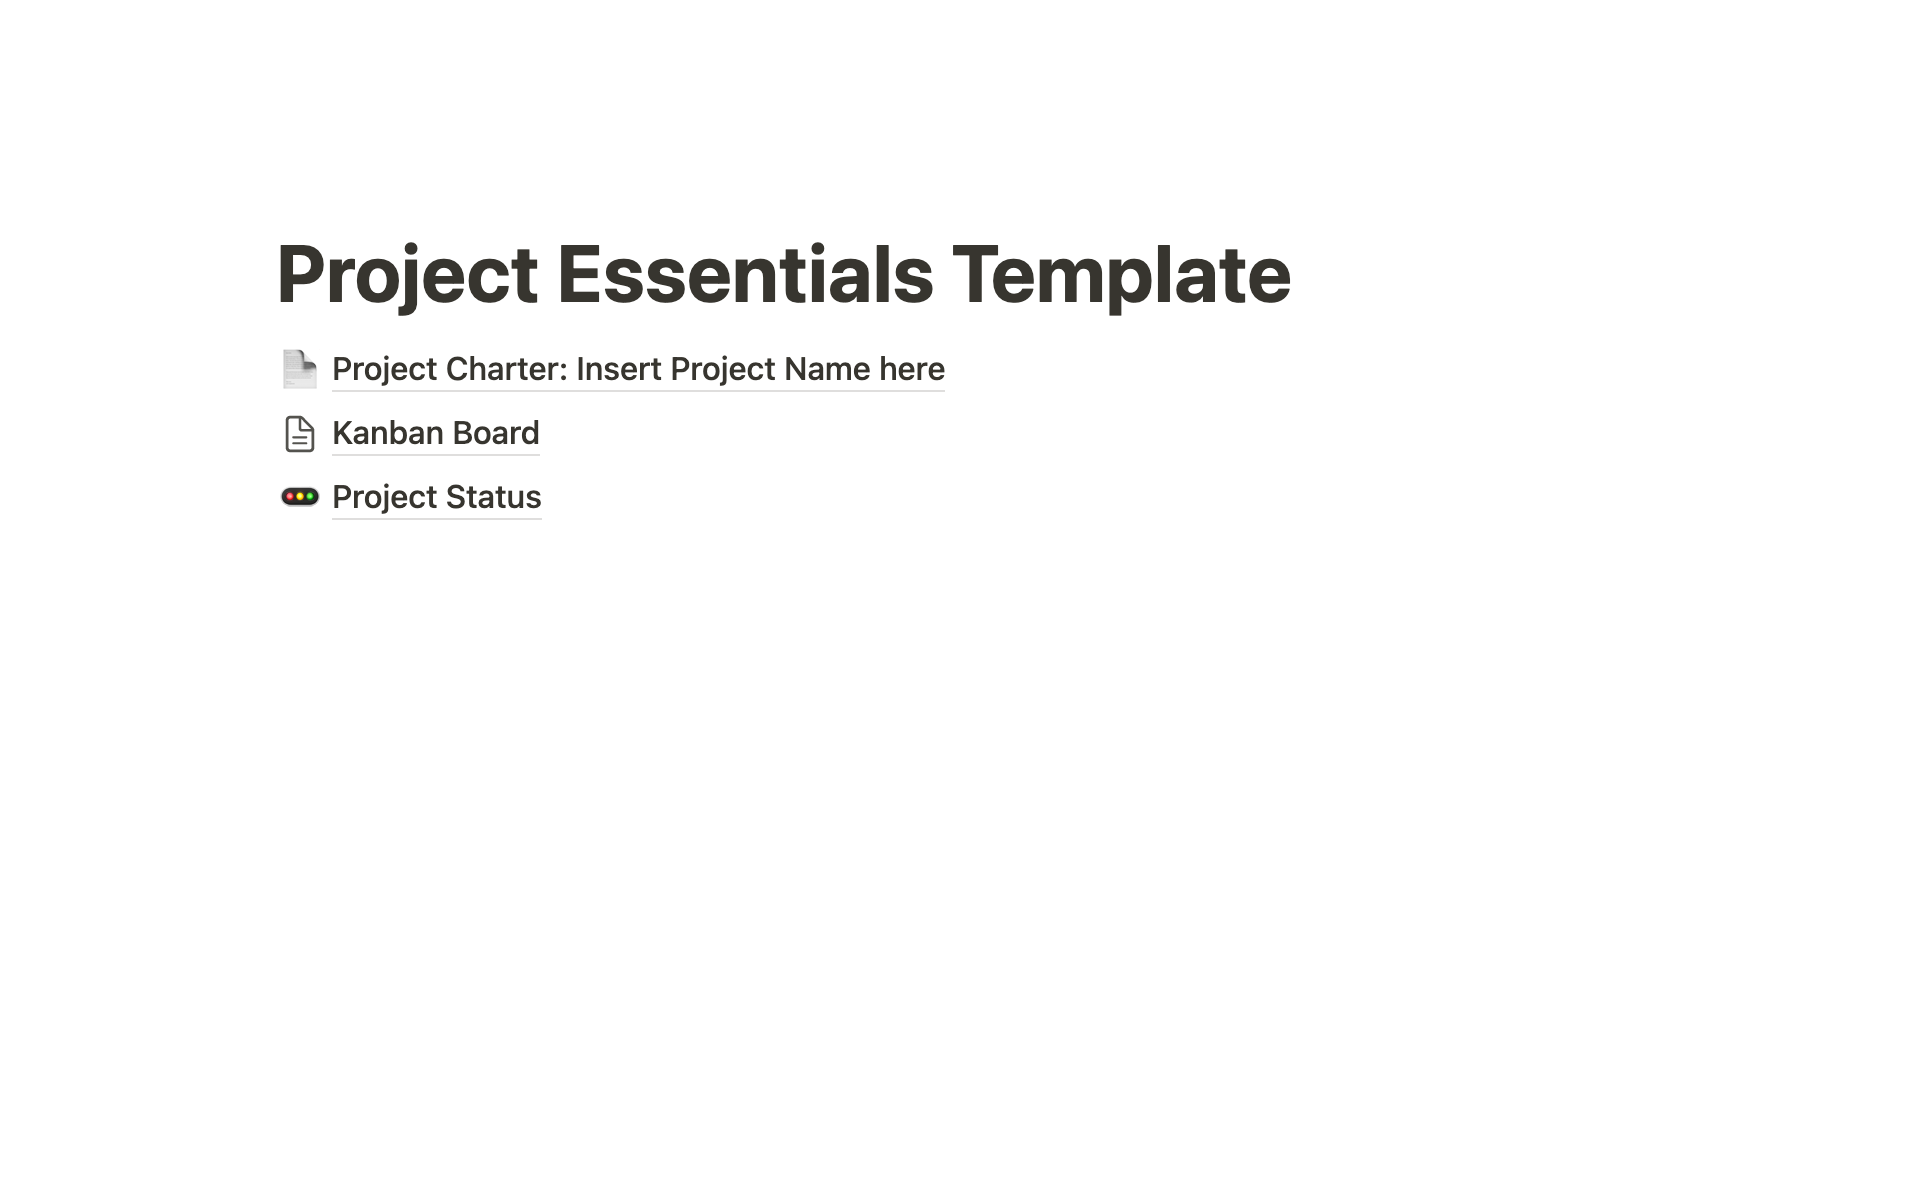 The "Project Essentials" Notion template provides a comprehensive and organized way to manage your projects from start to finish.